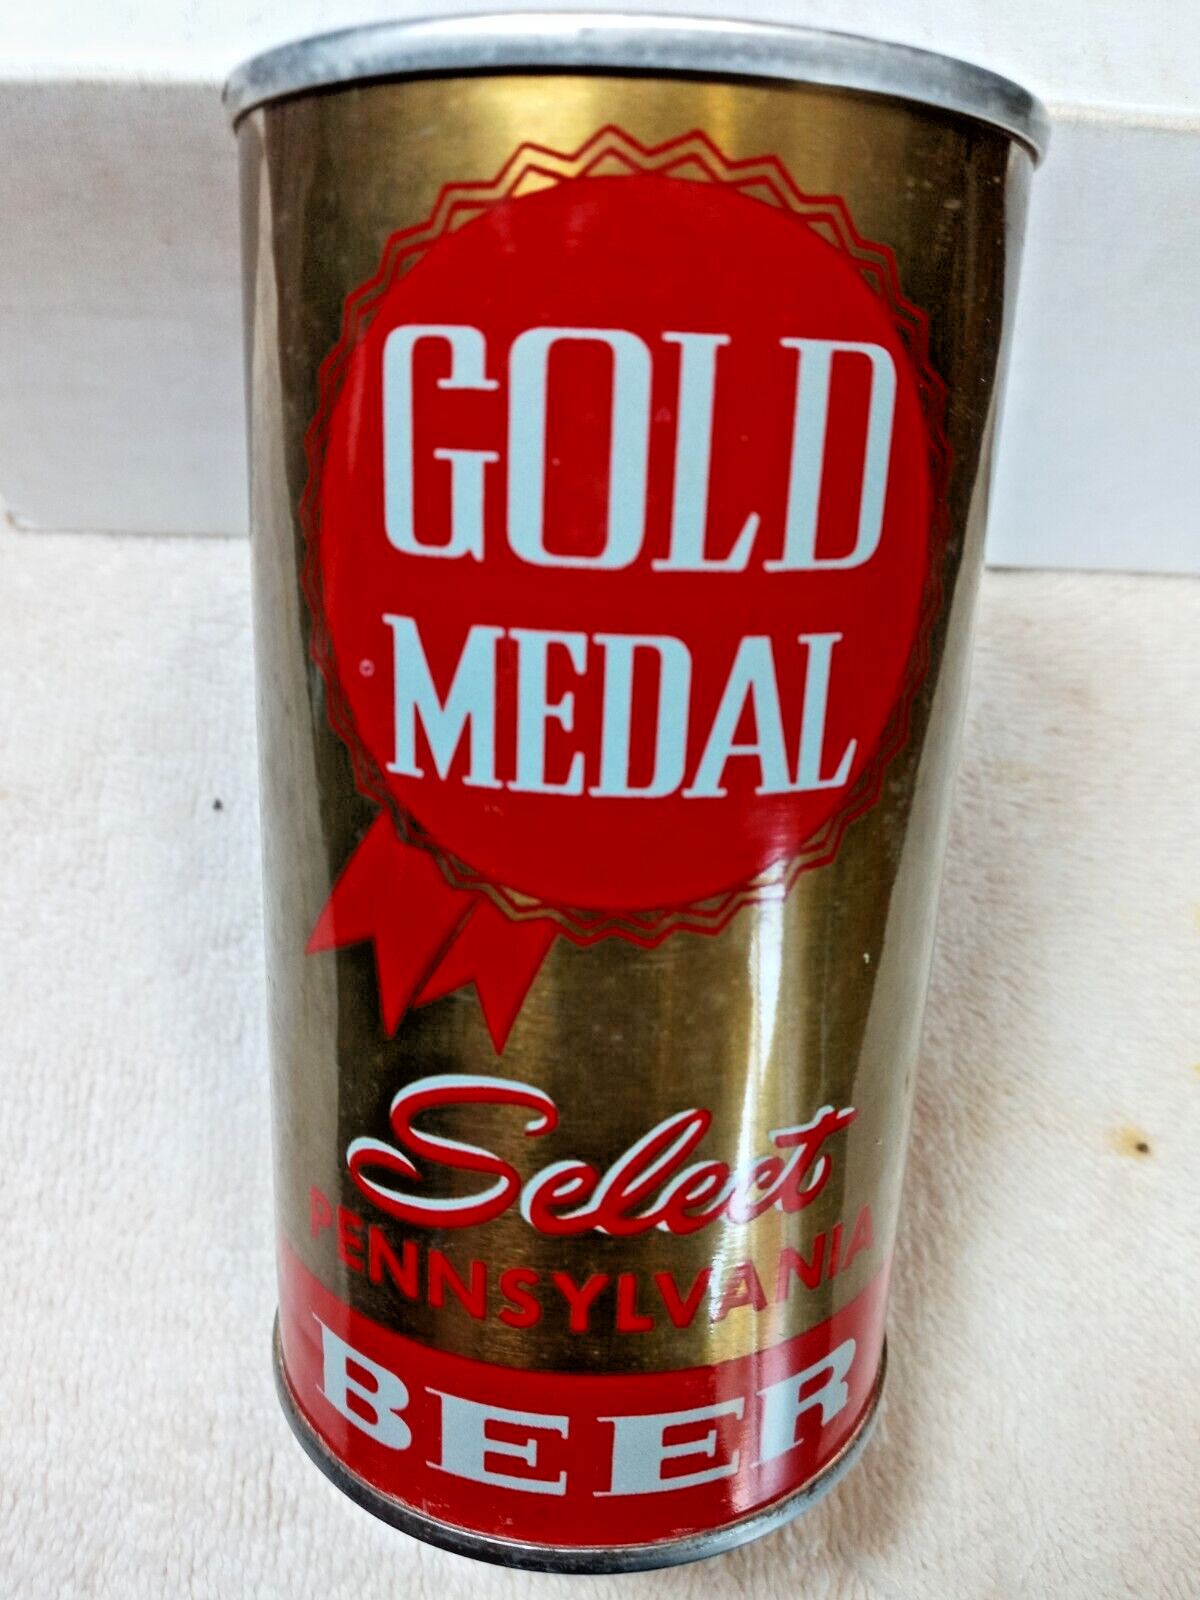 Gold Medal   beer pull tab beer can , Wikes- barre PA   empty